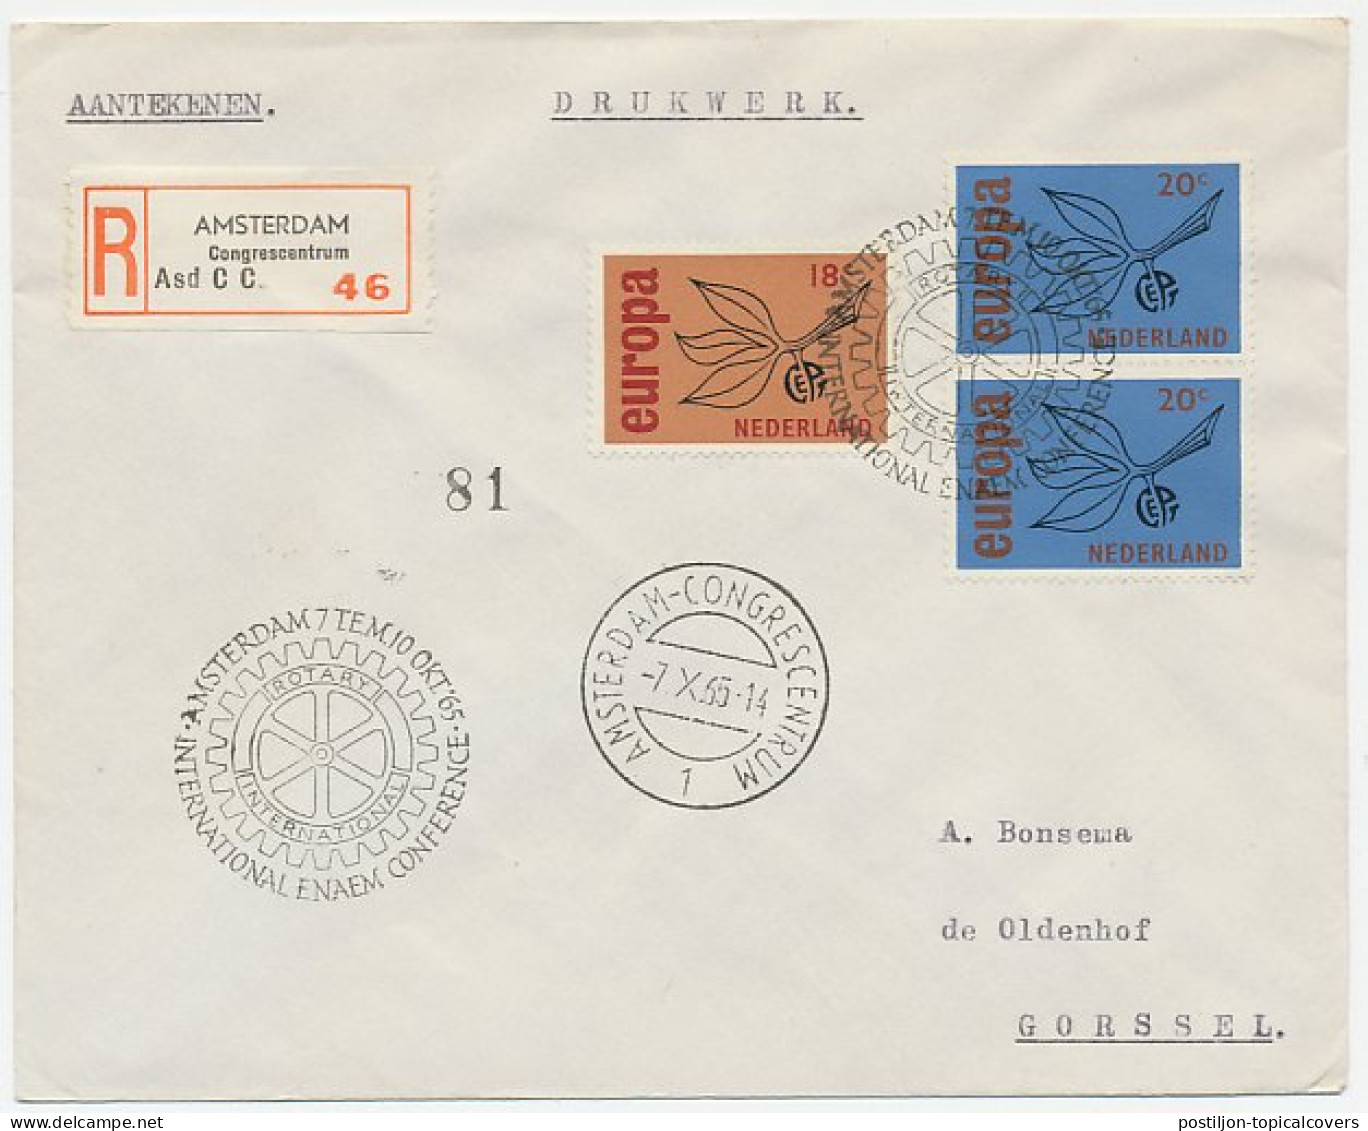 Registered Cover / Postmark Netherlands 1965 Rotary International Conference - Rotary, Lions Club